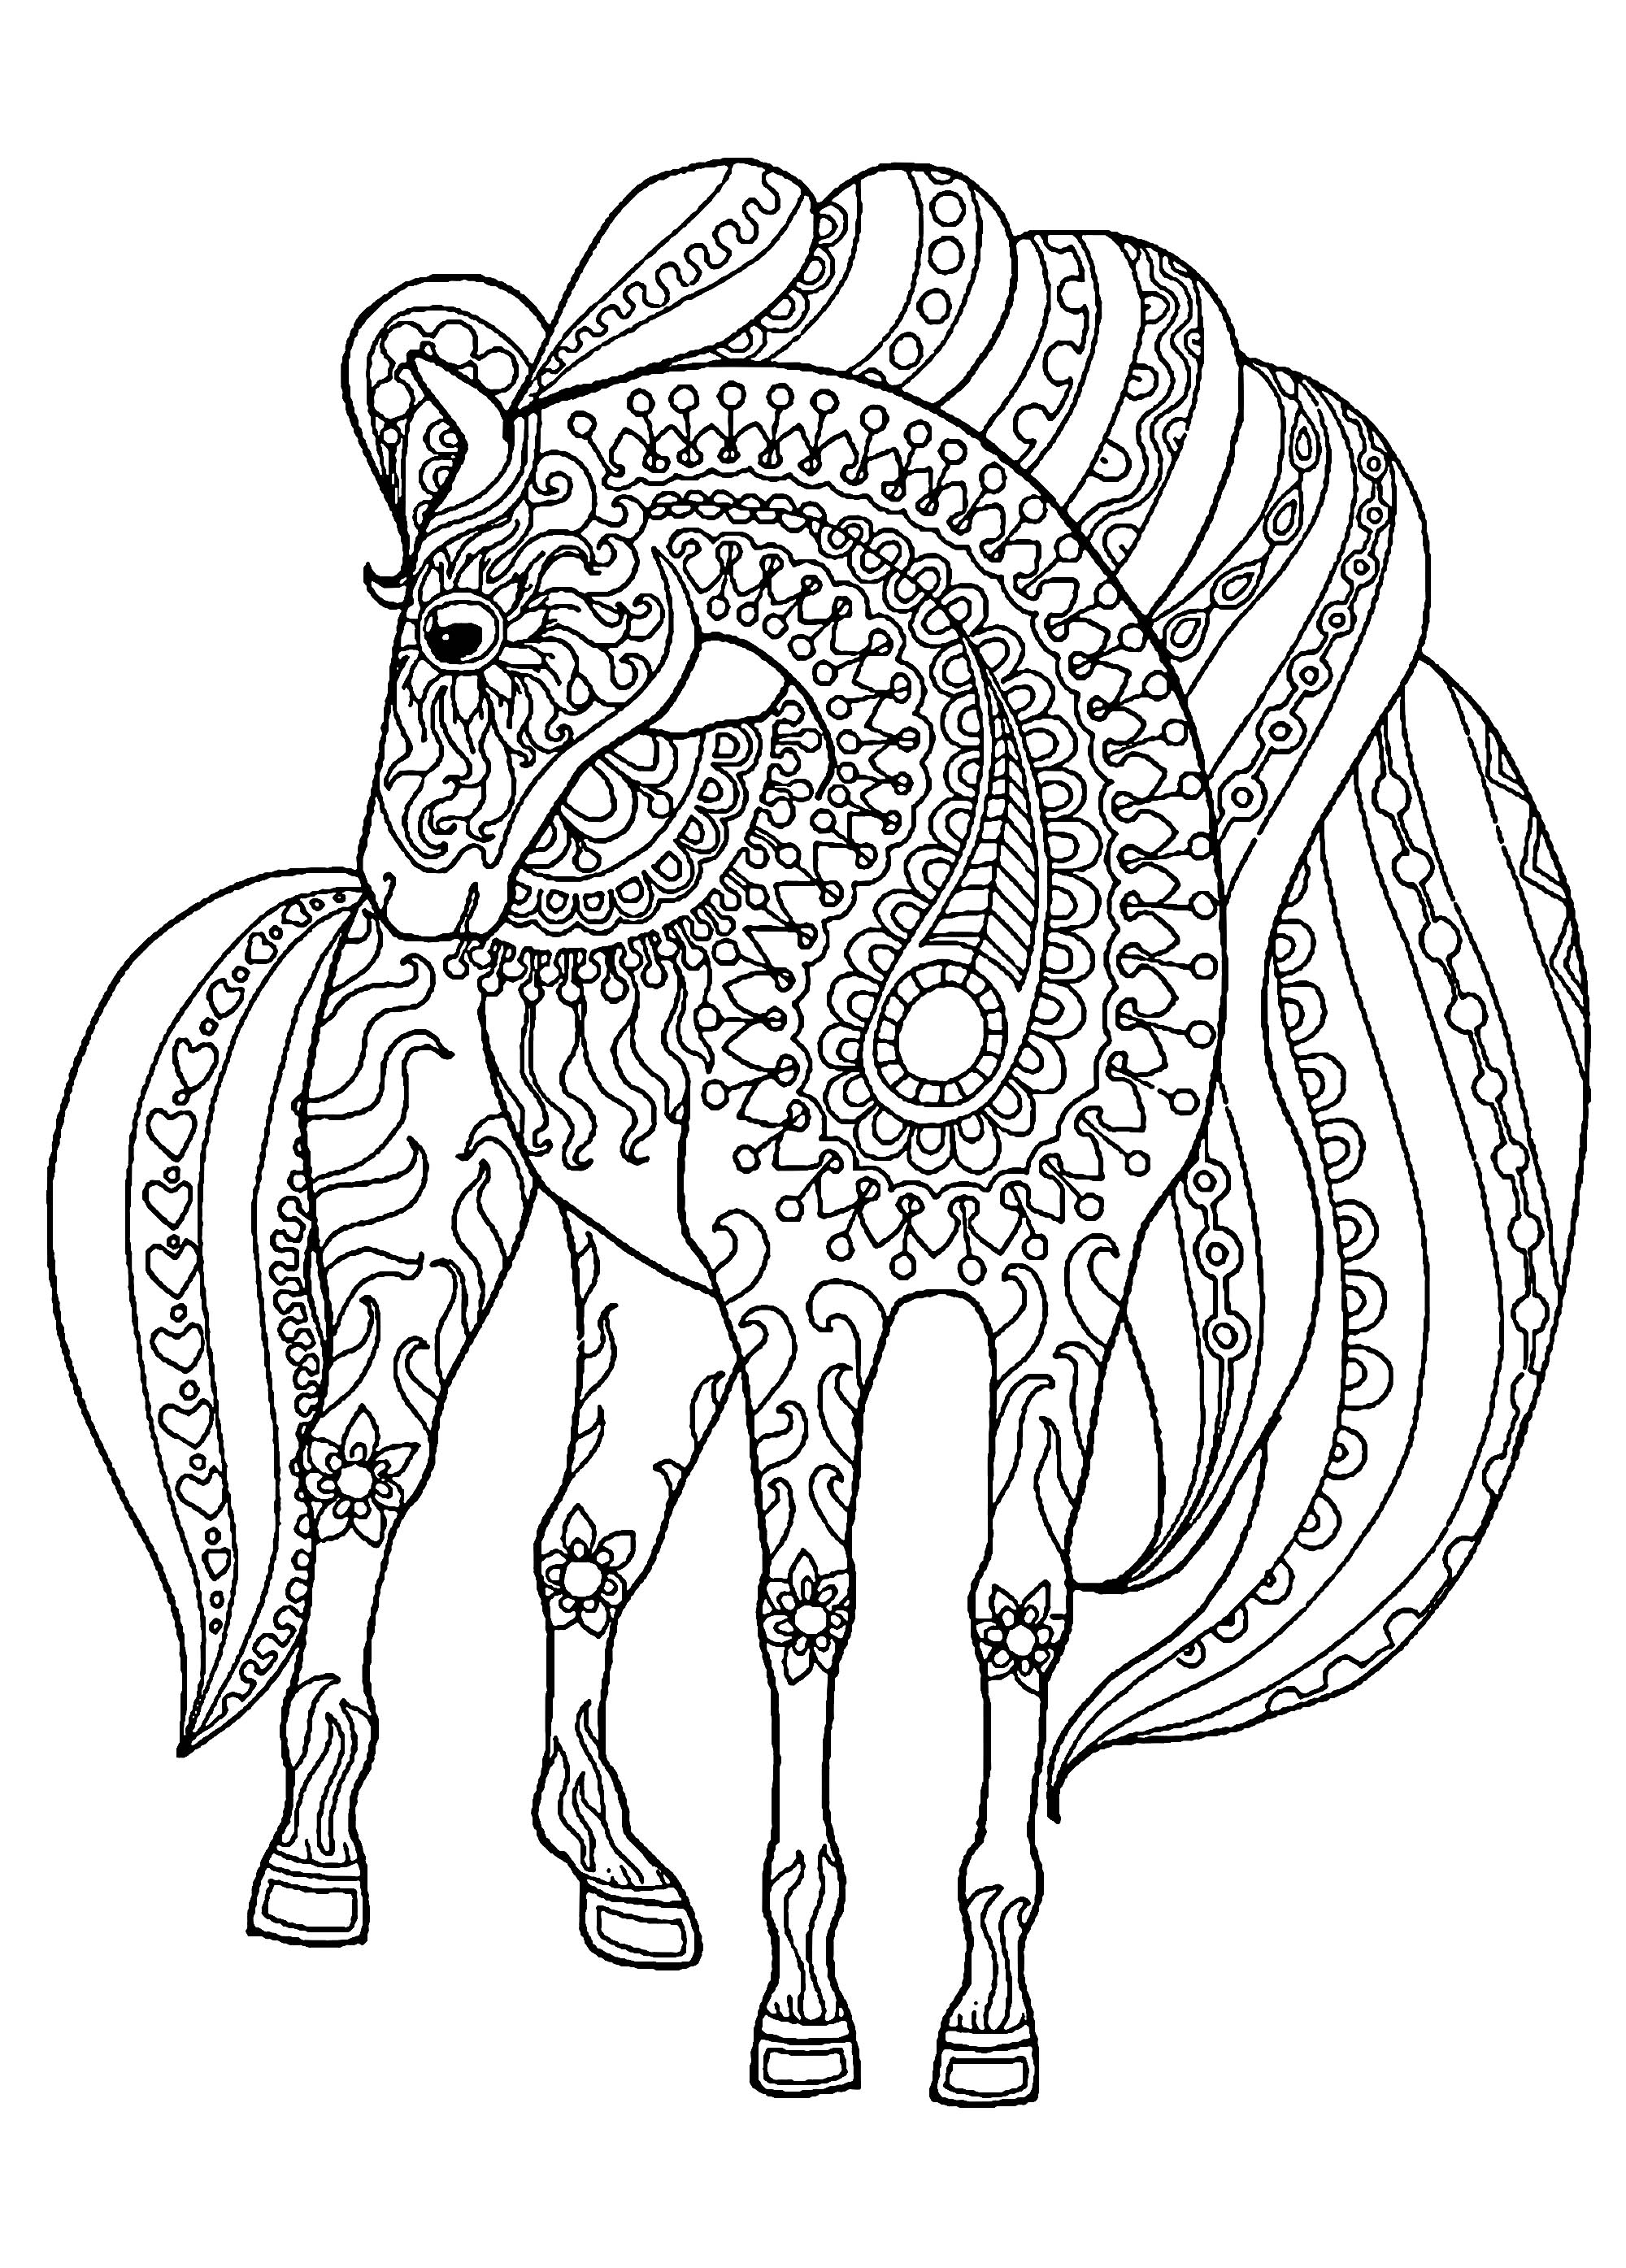 Download Horse With Patterns Free To Color For Children Horses Kids Coloring Pages